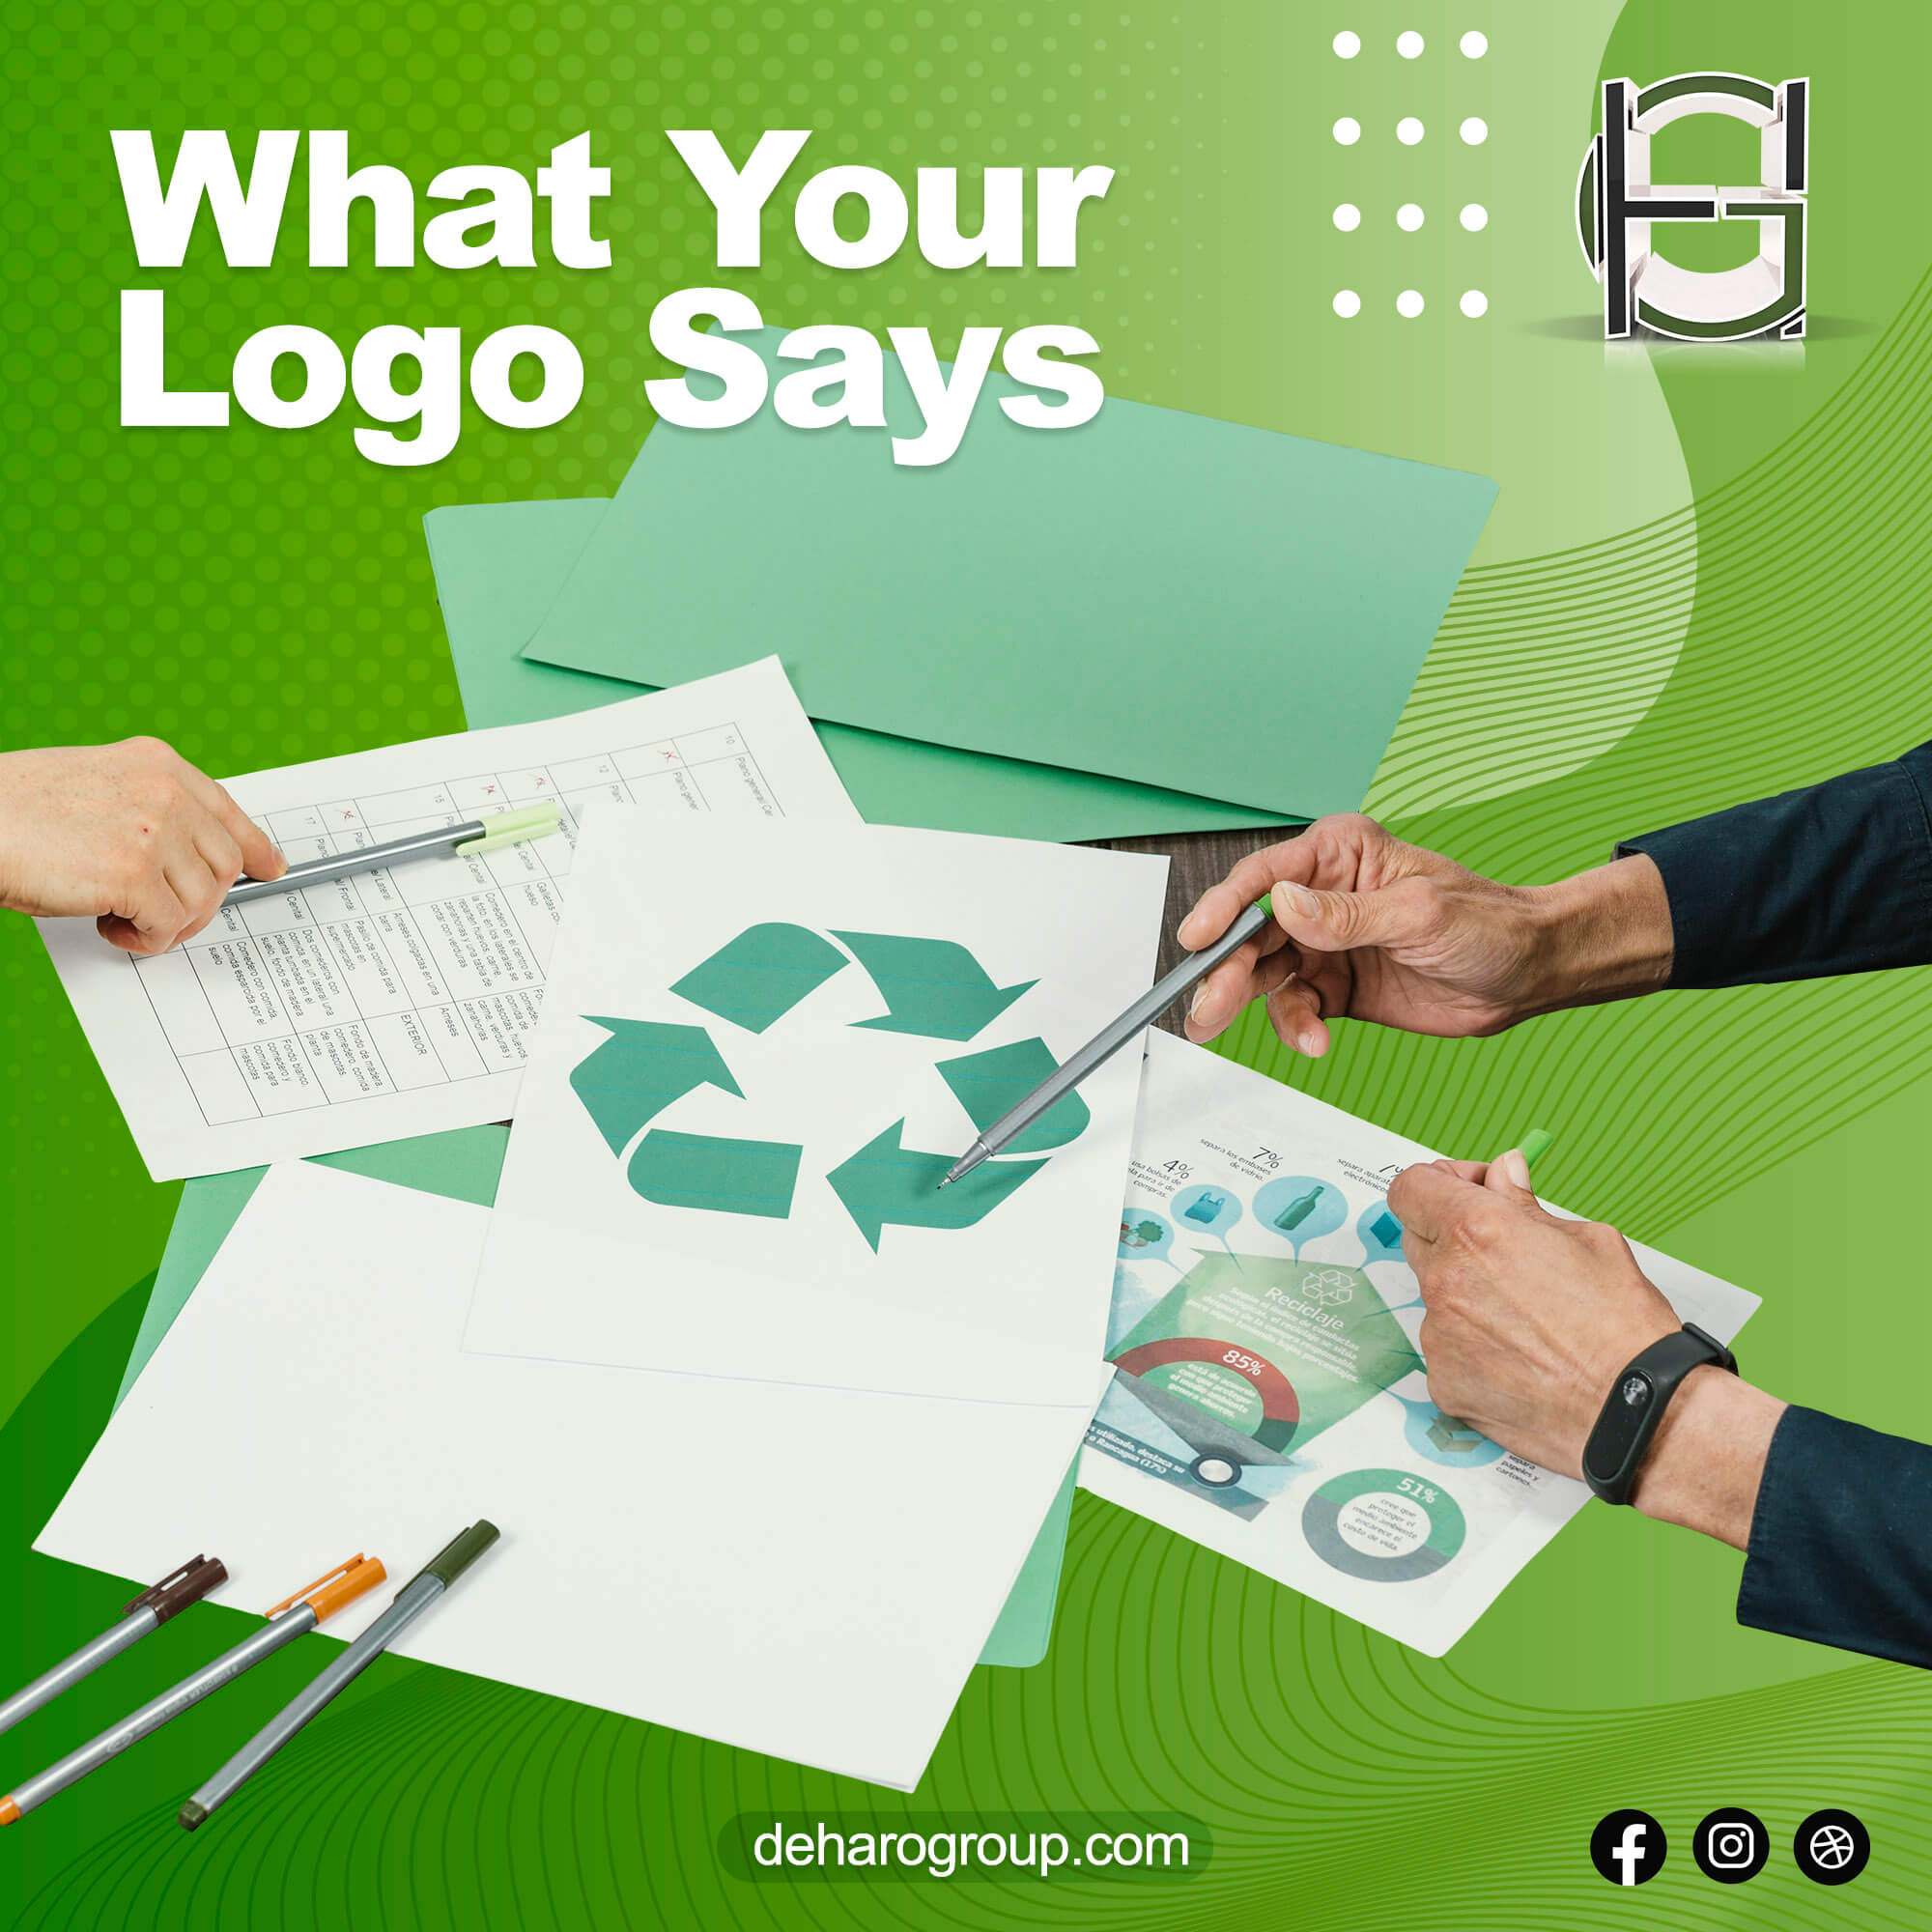 What Your Logo Says